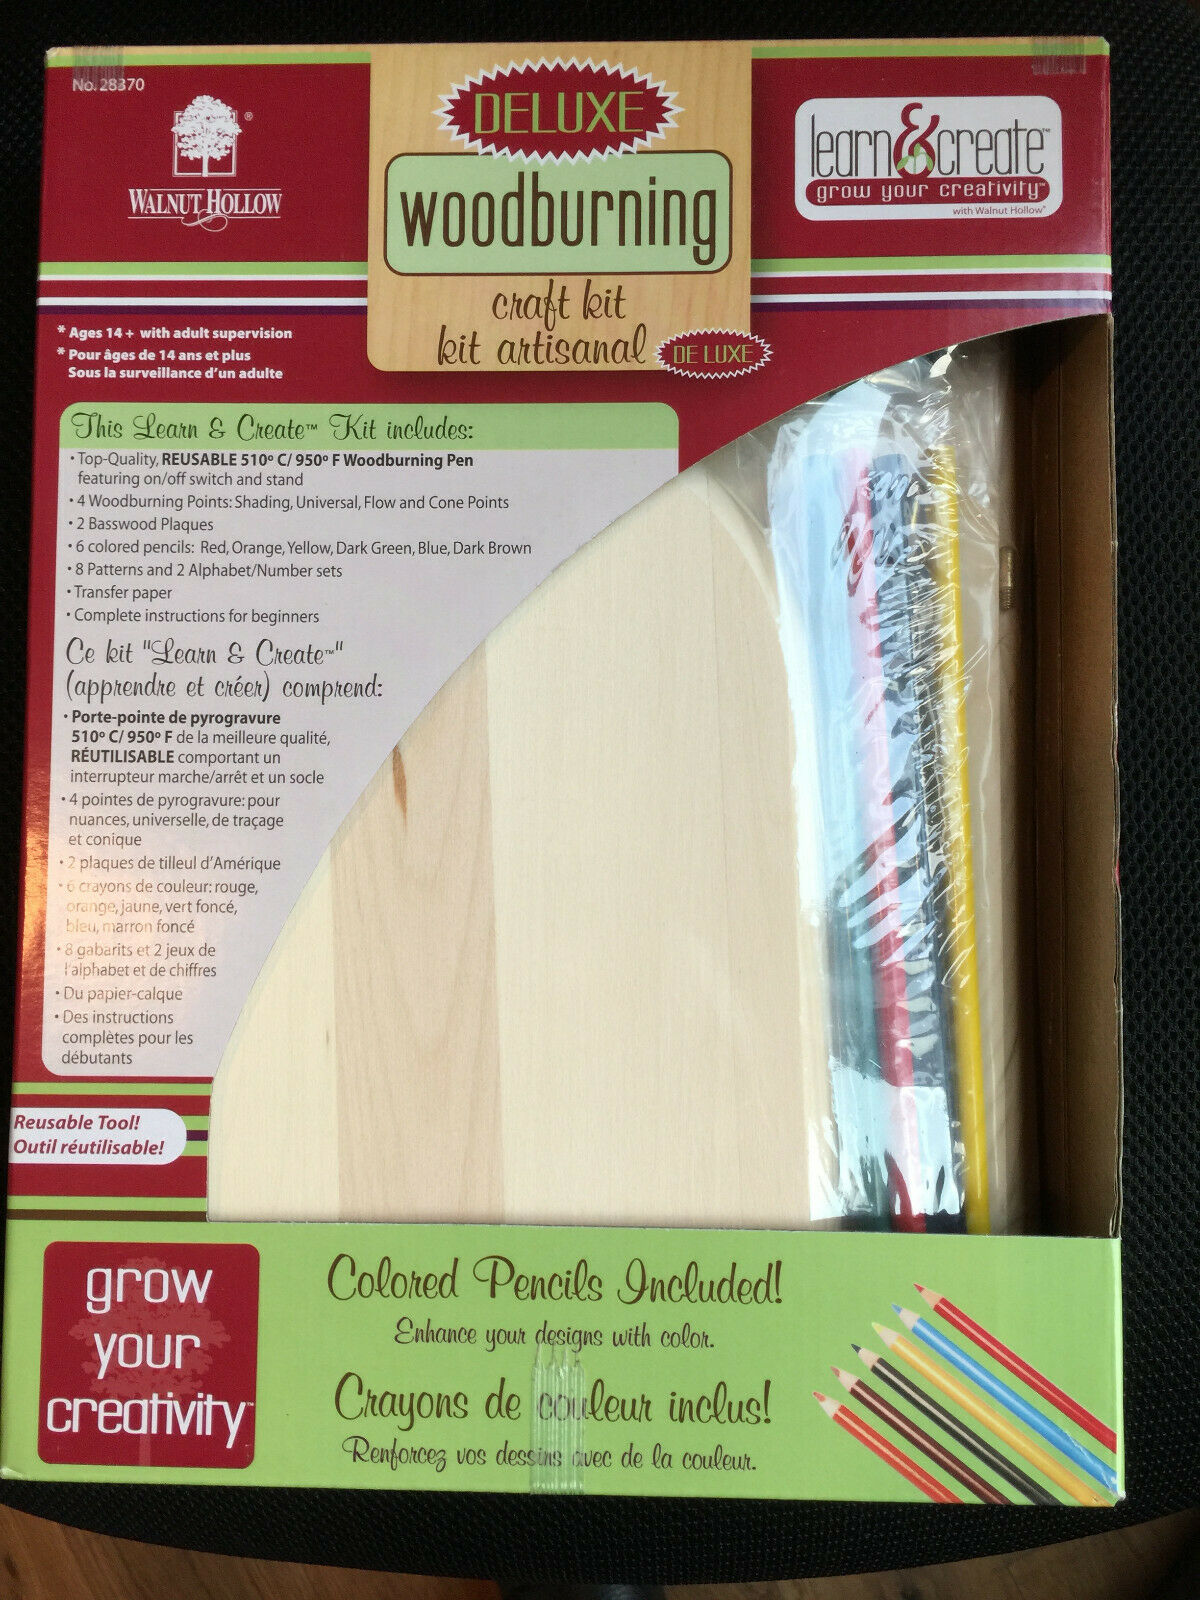 Brand New ~ Deluxe Woodburning Craft Kit ~ Walnut Hollow #28370 (2 Kits Avail)